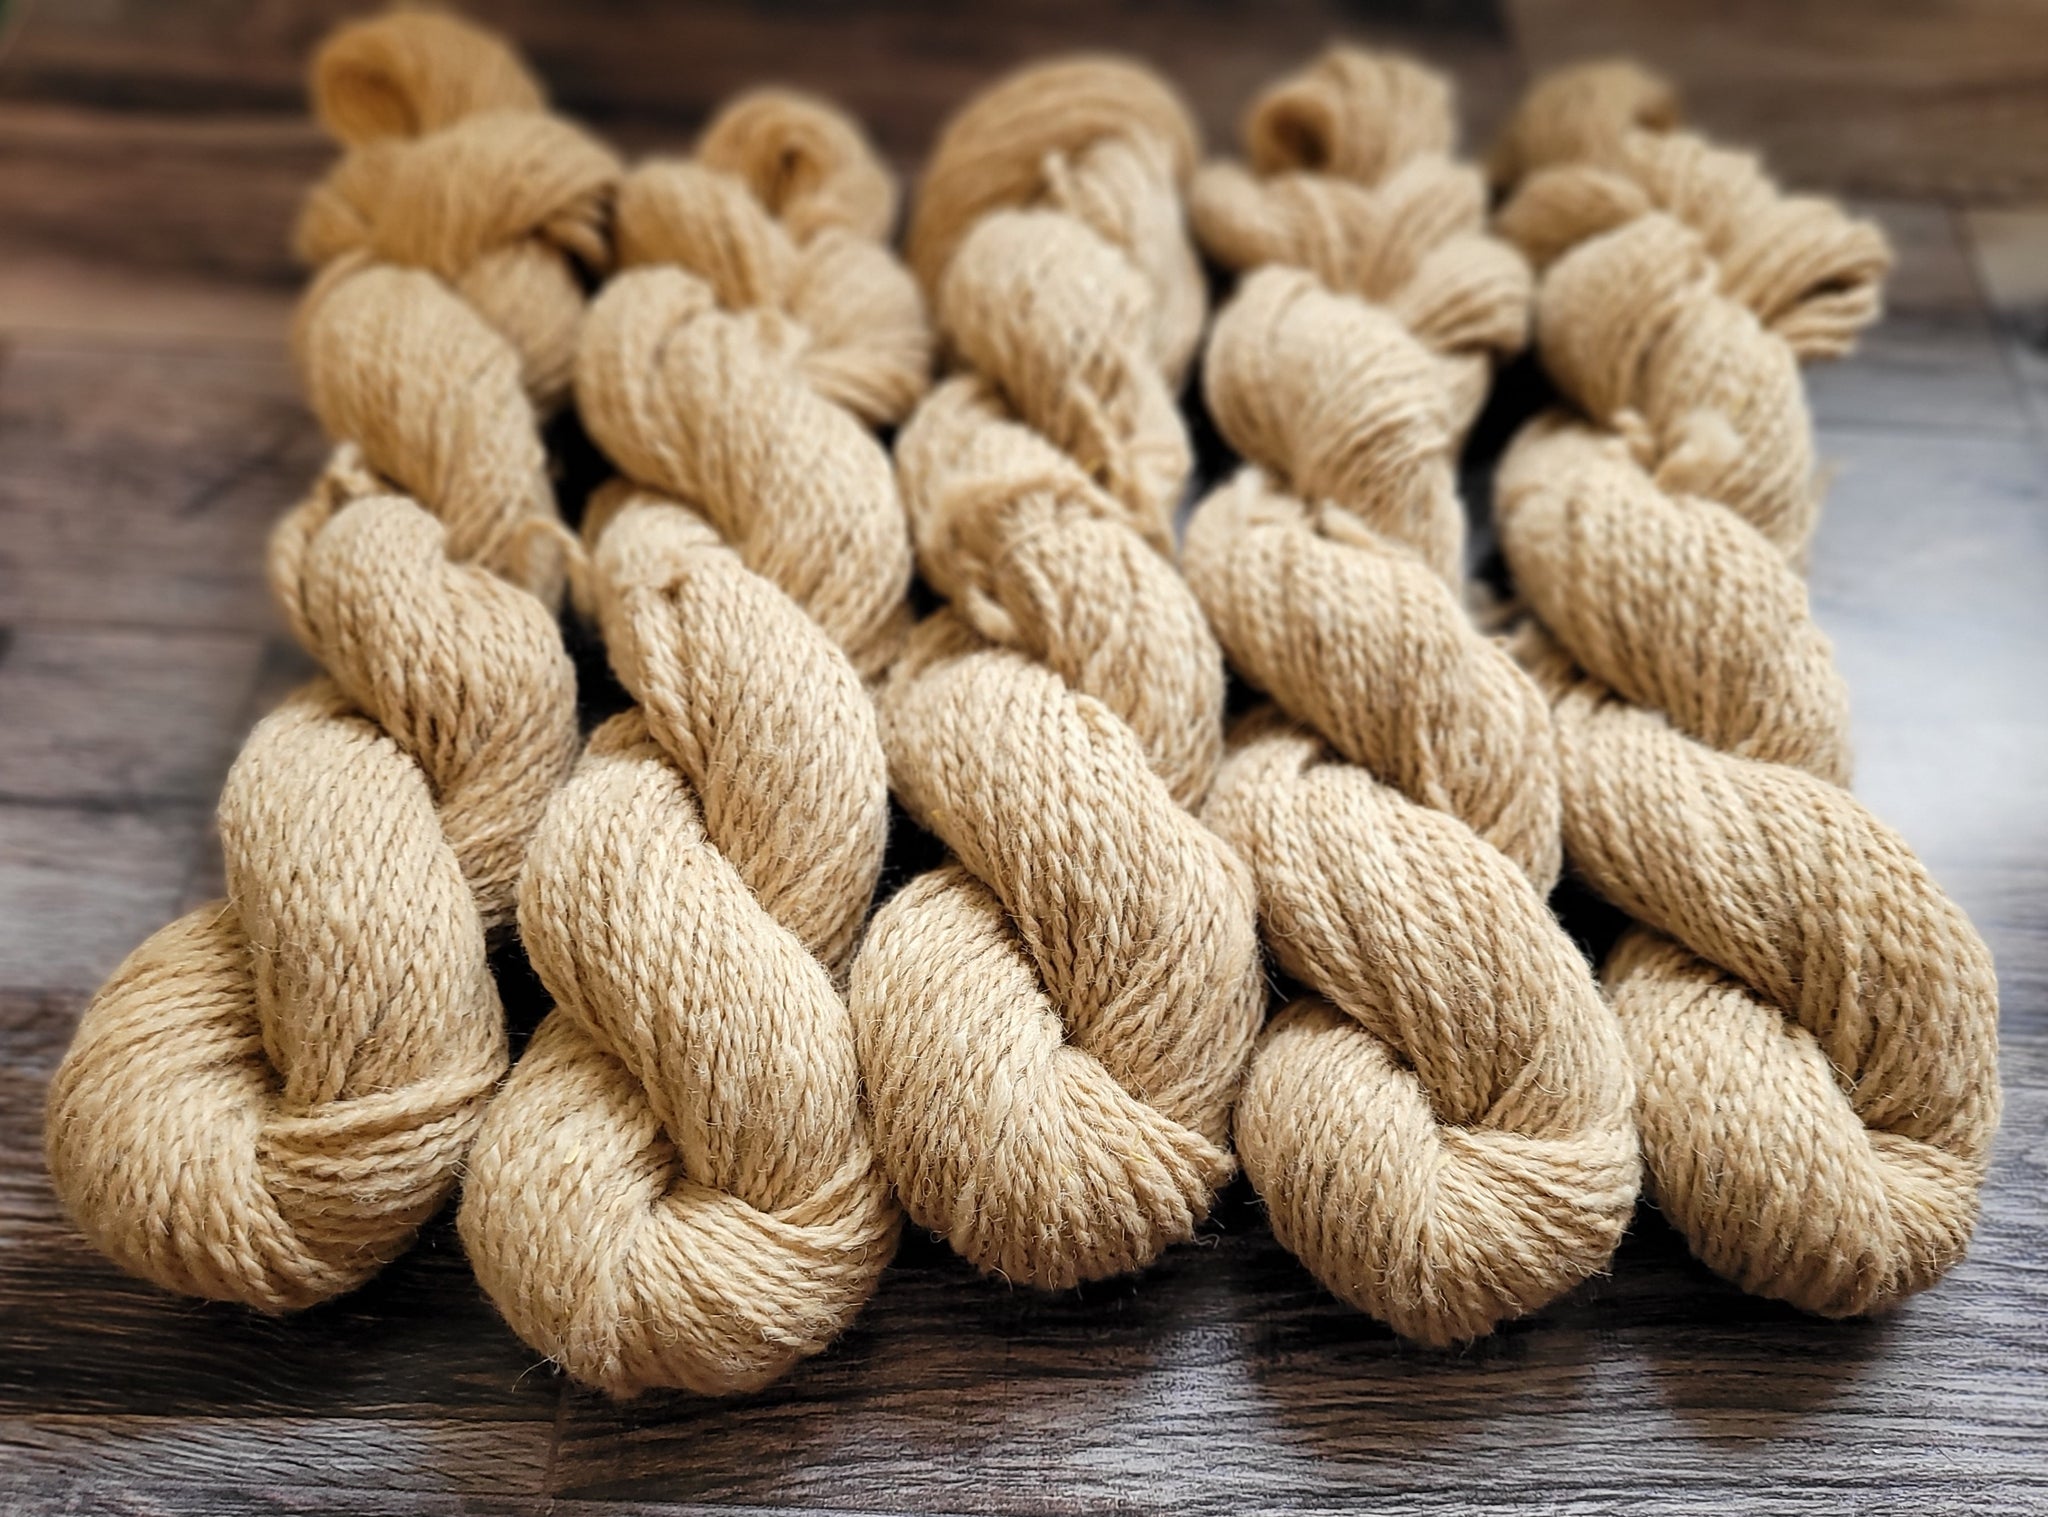 Tan - Alpacalyptic - Worsted weight - 2 ply - locally sourced & milled